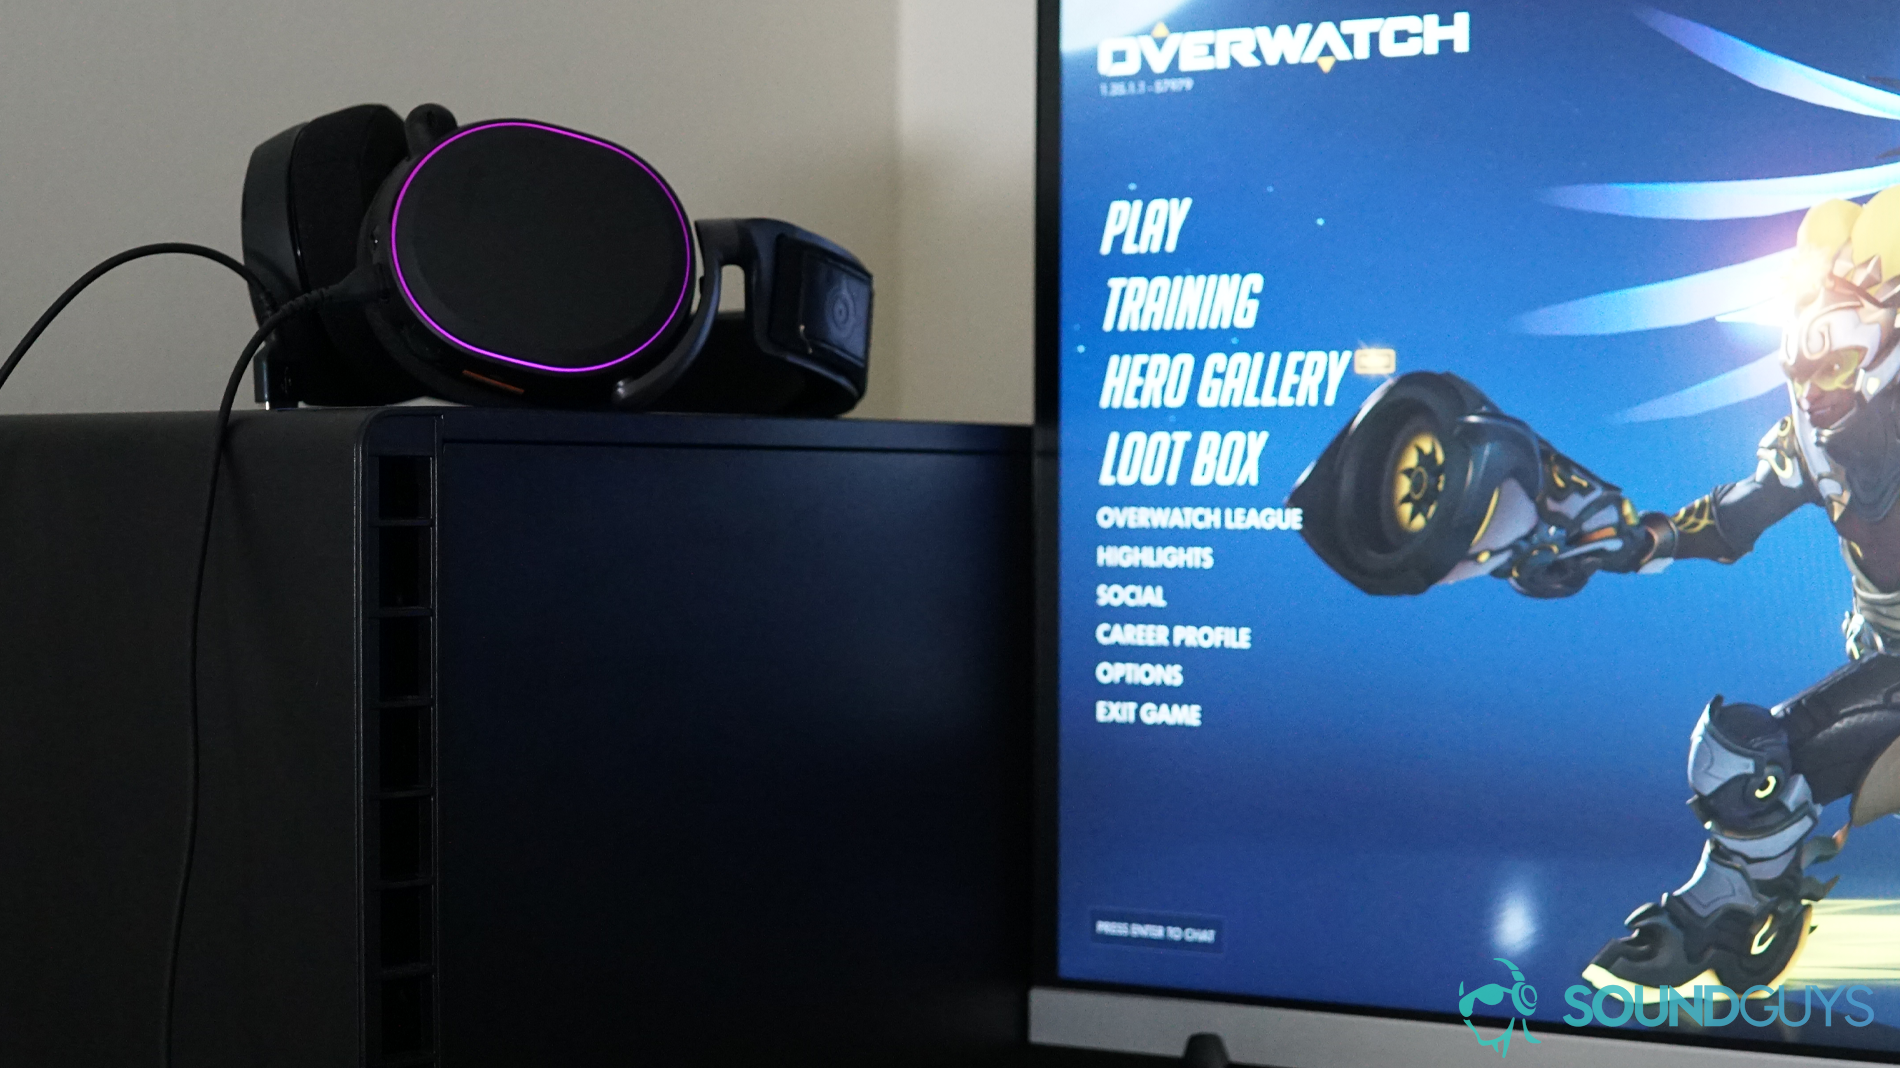 The SteelSeries Arctis Pro sits on a desktop PC tower next to a monitor with Overwatch running.